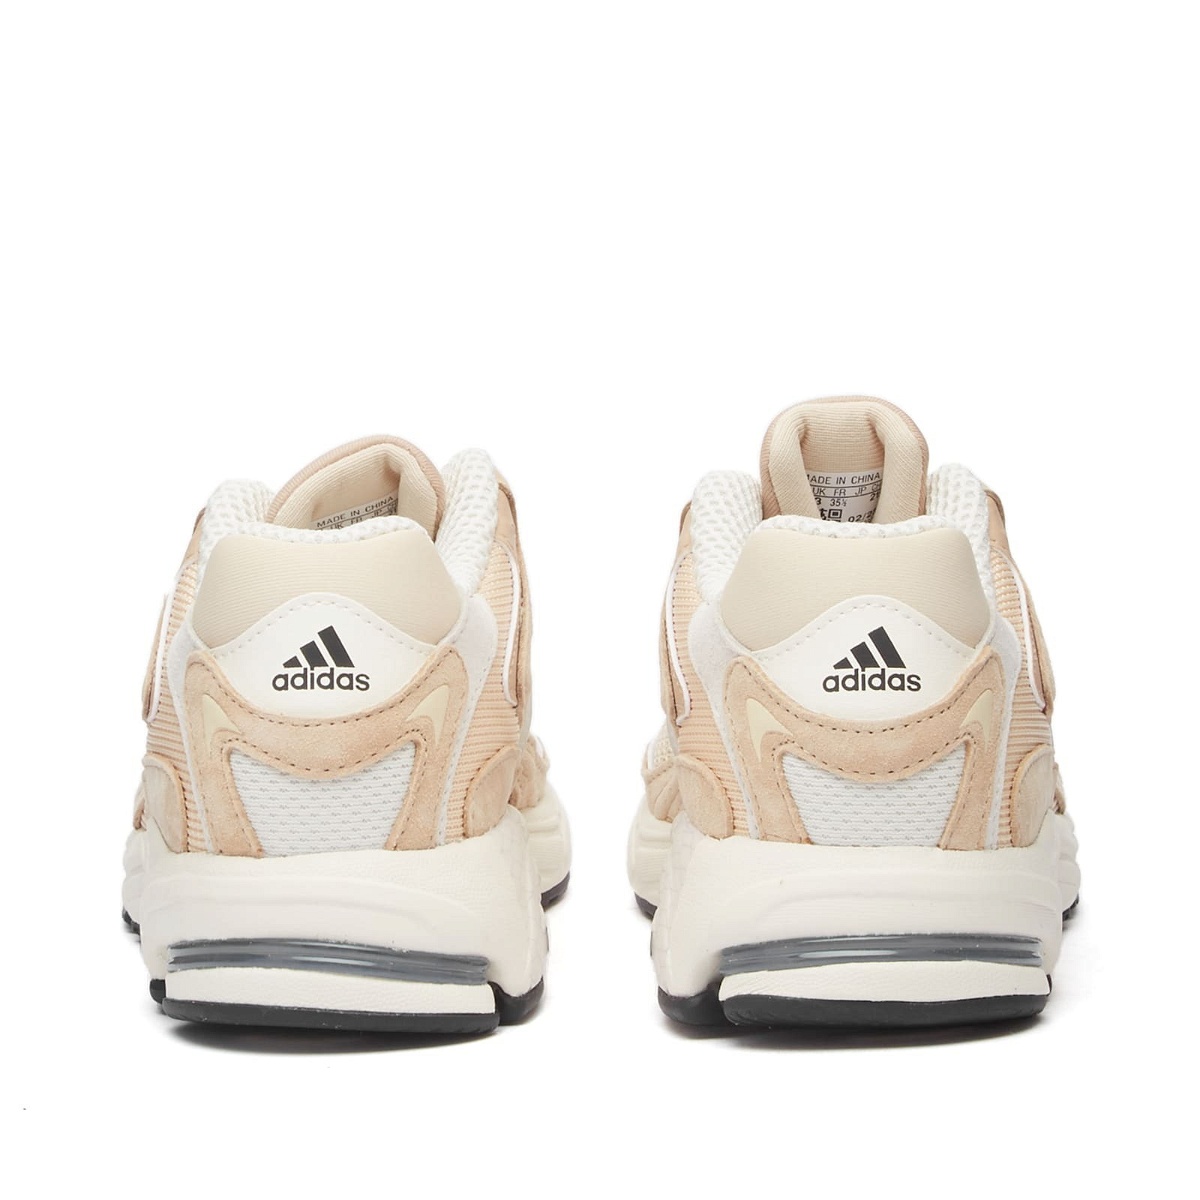 in CL Sneakers White/Beige Sand/Off Response Adidas adidas